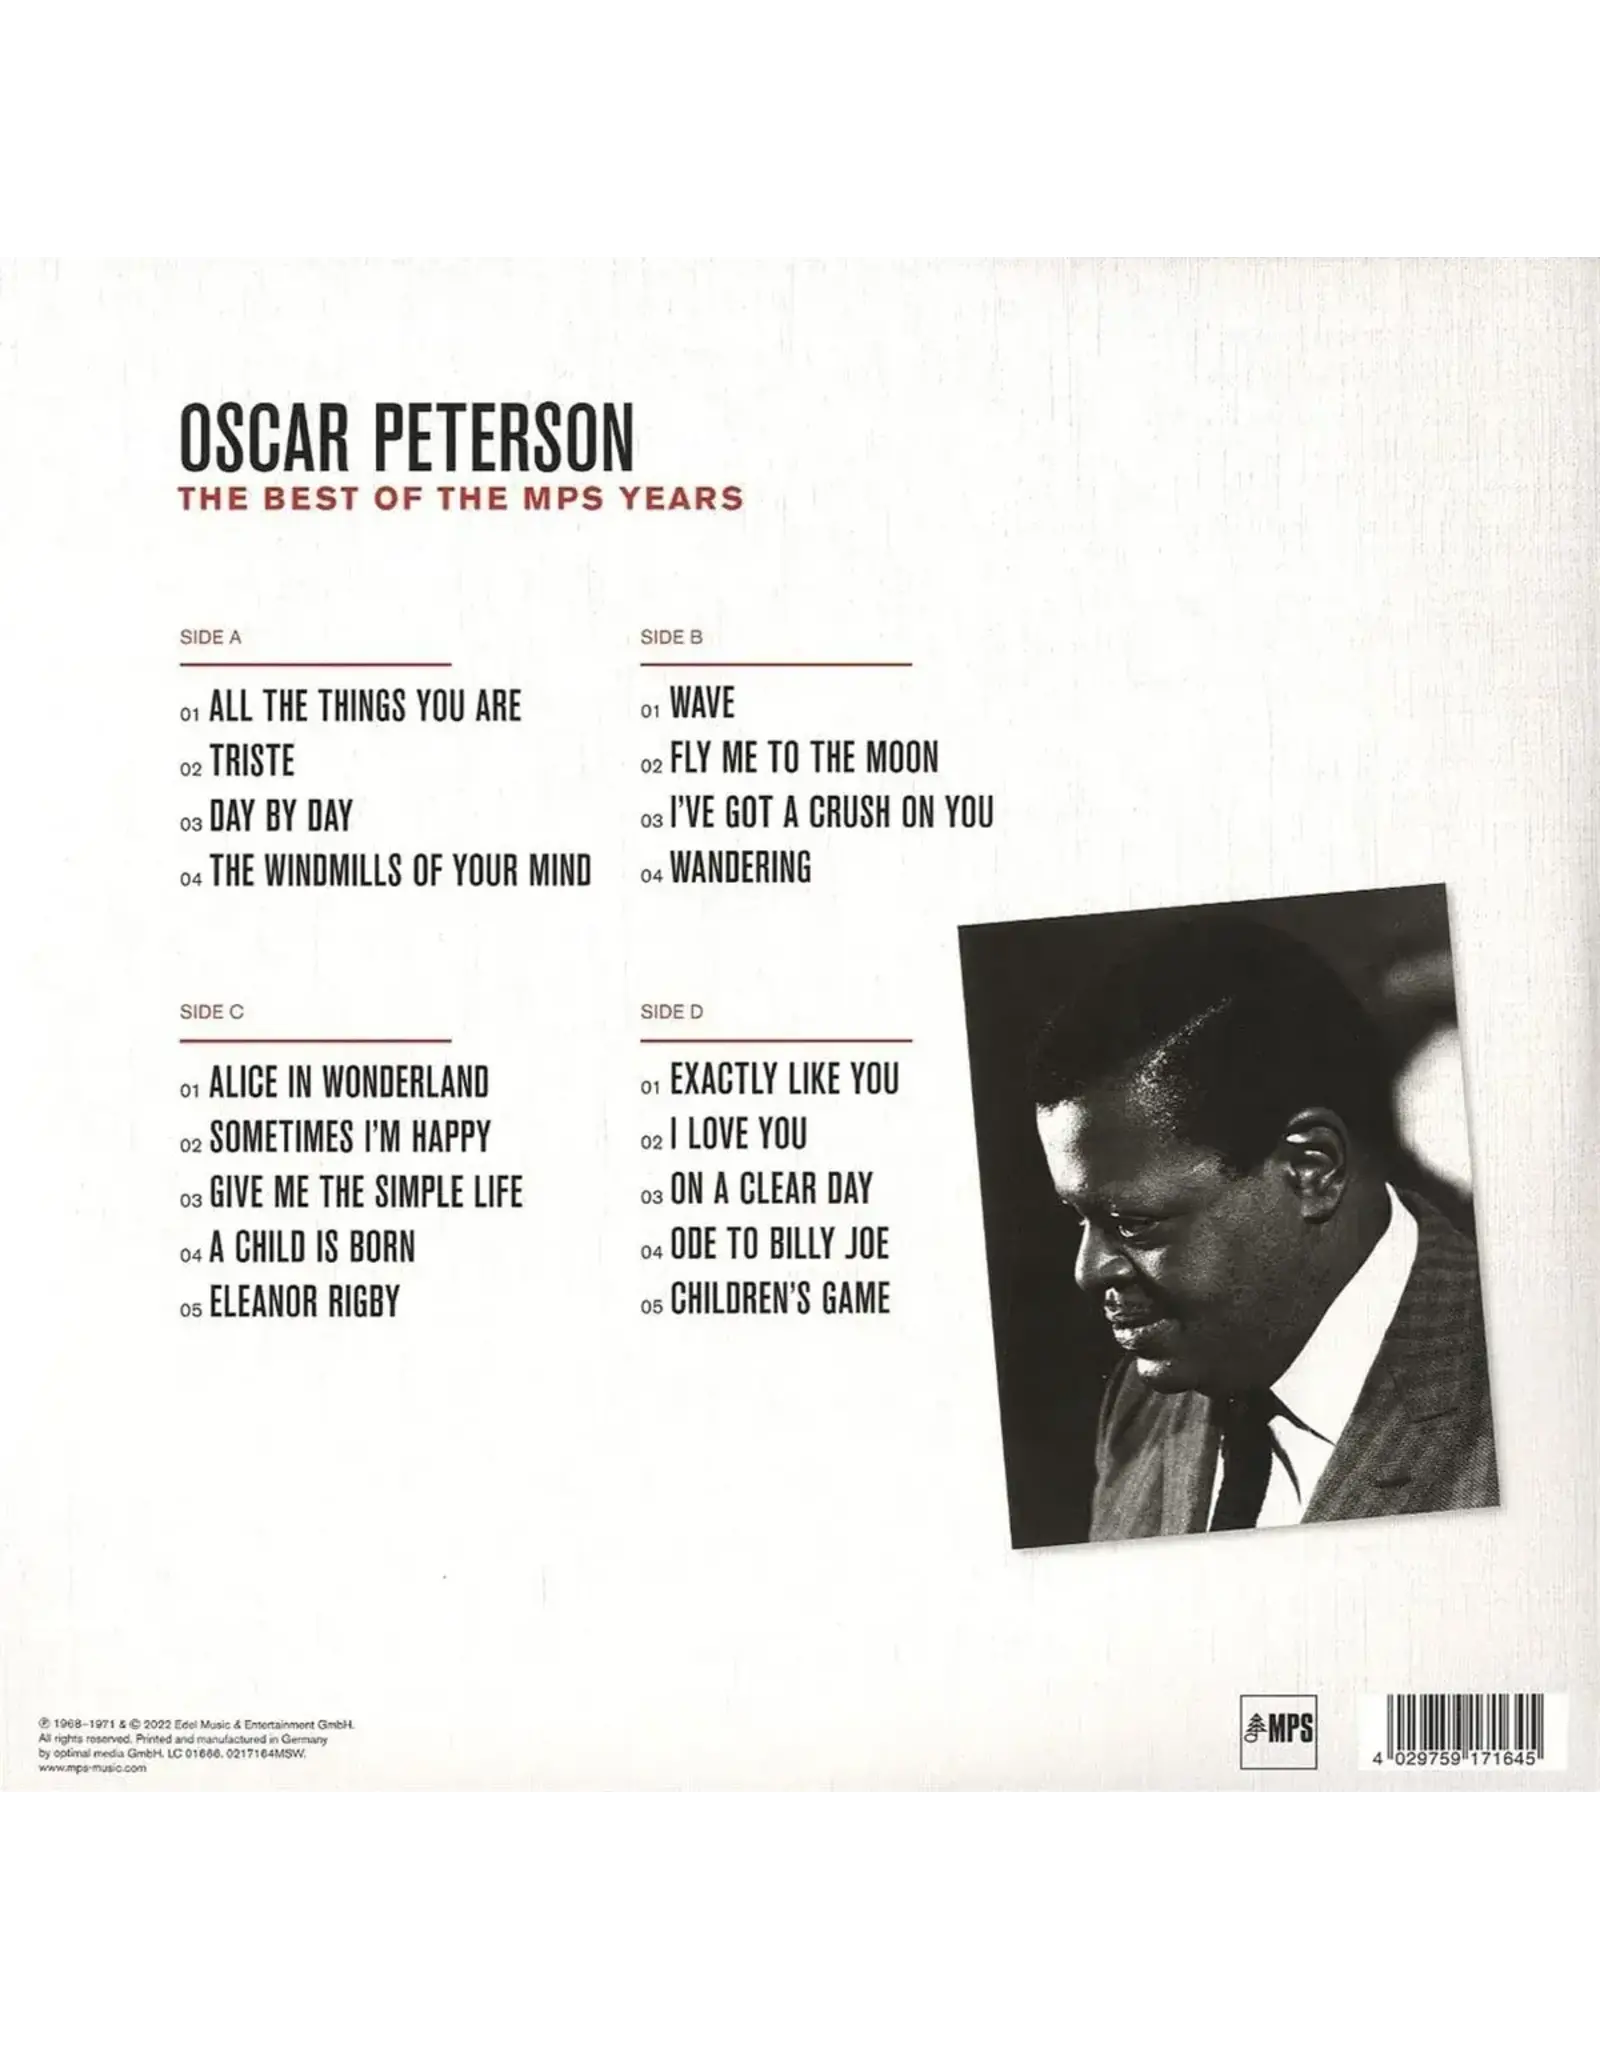 Oscar Peterson - The Best of The MPS Years